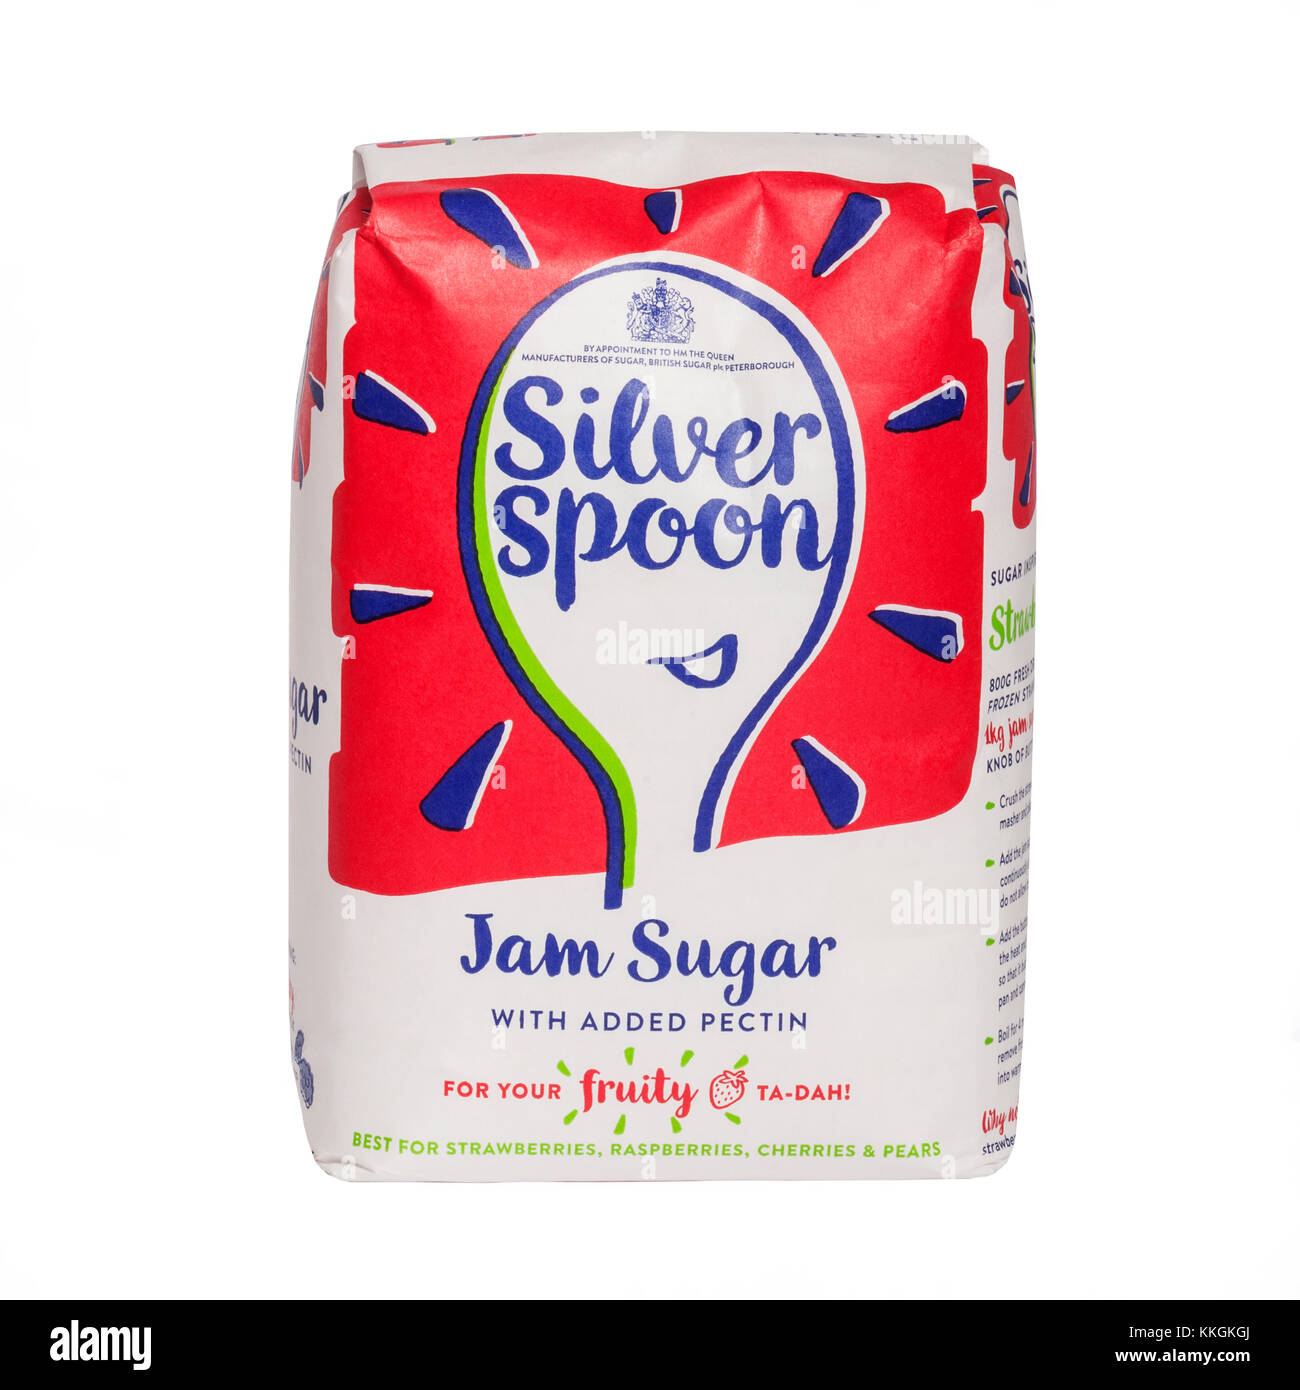 Silver Spoon Jam Sugar on a white background Stock Photo